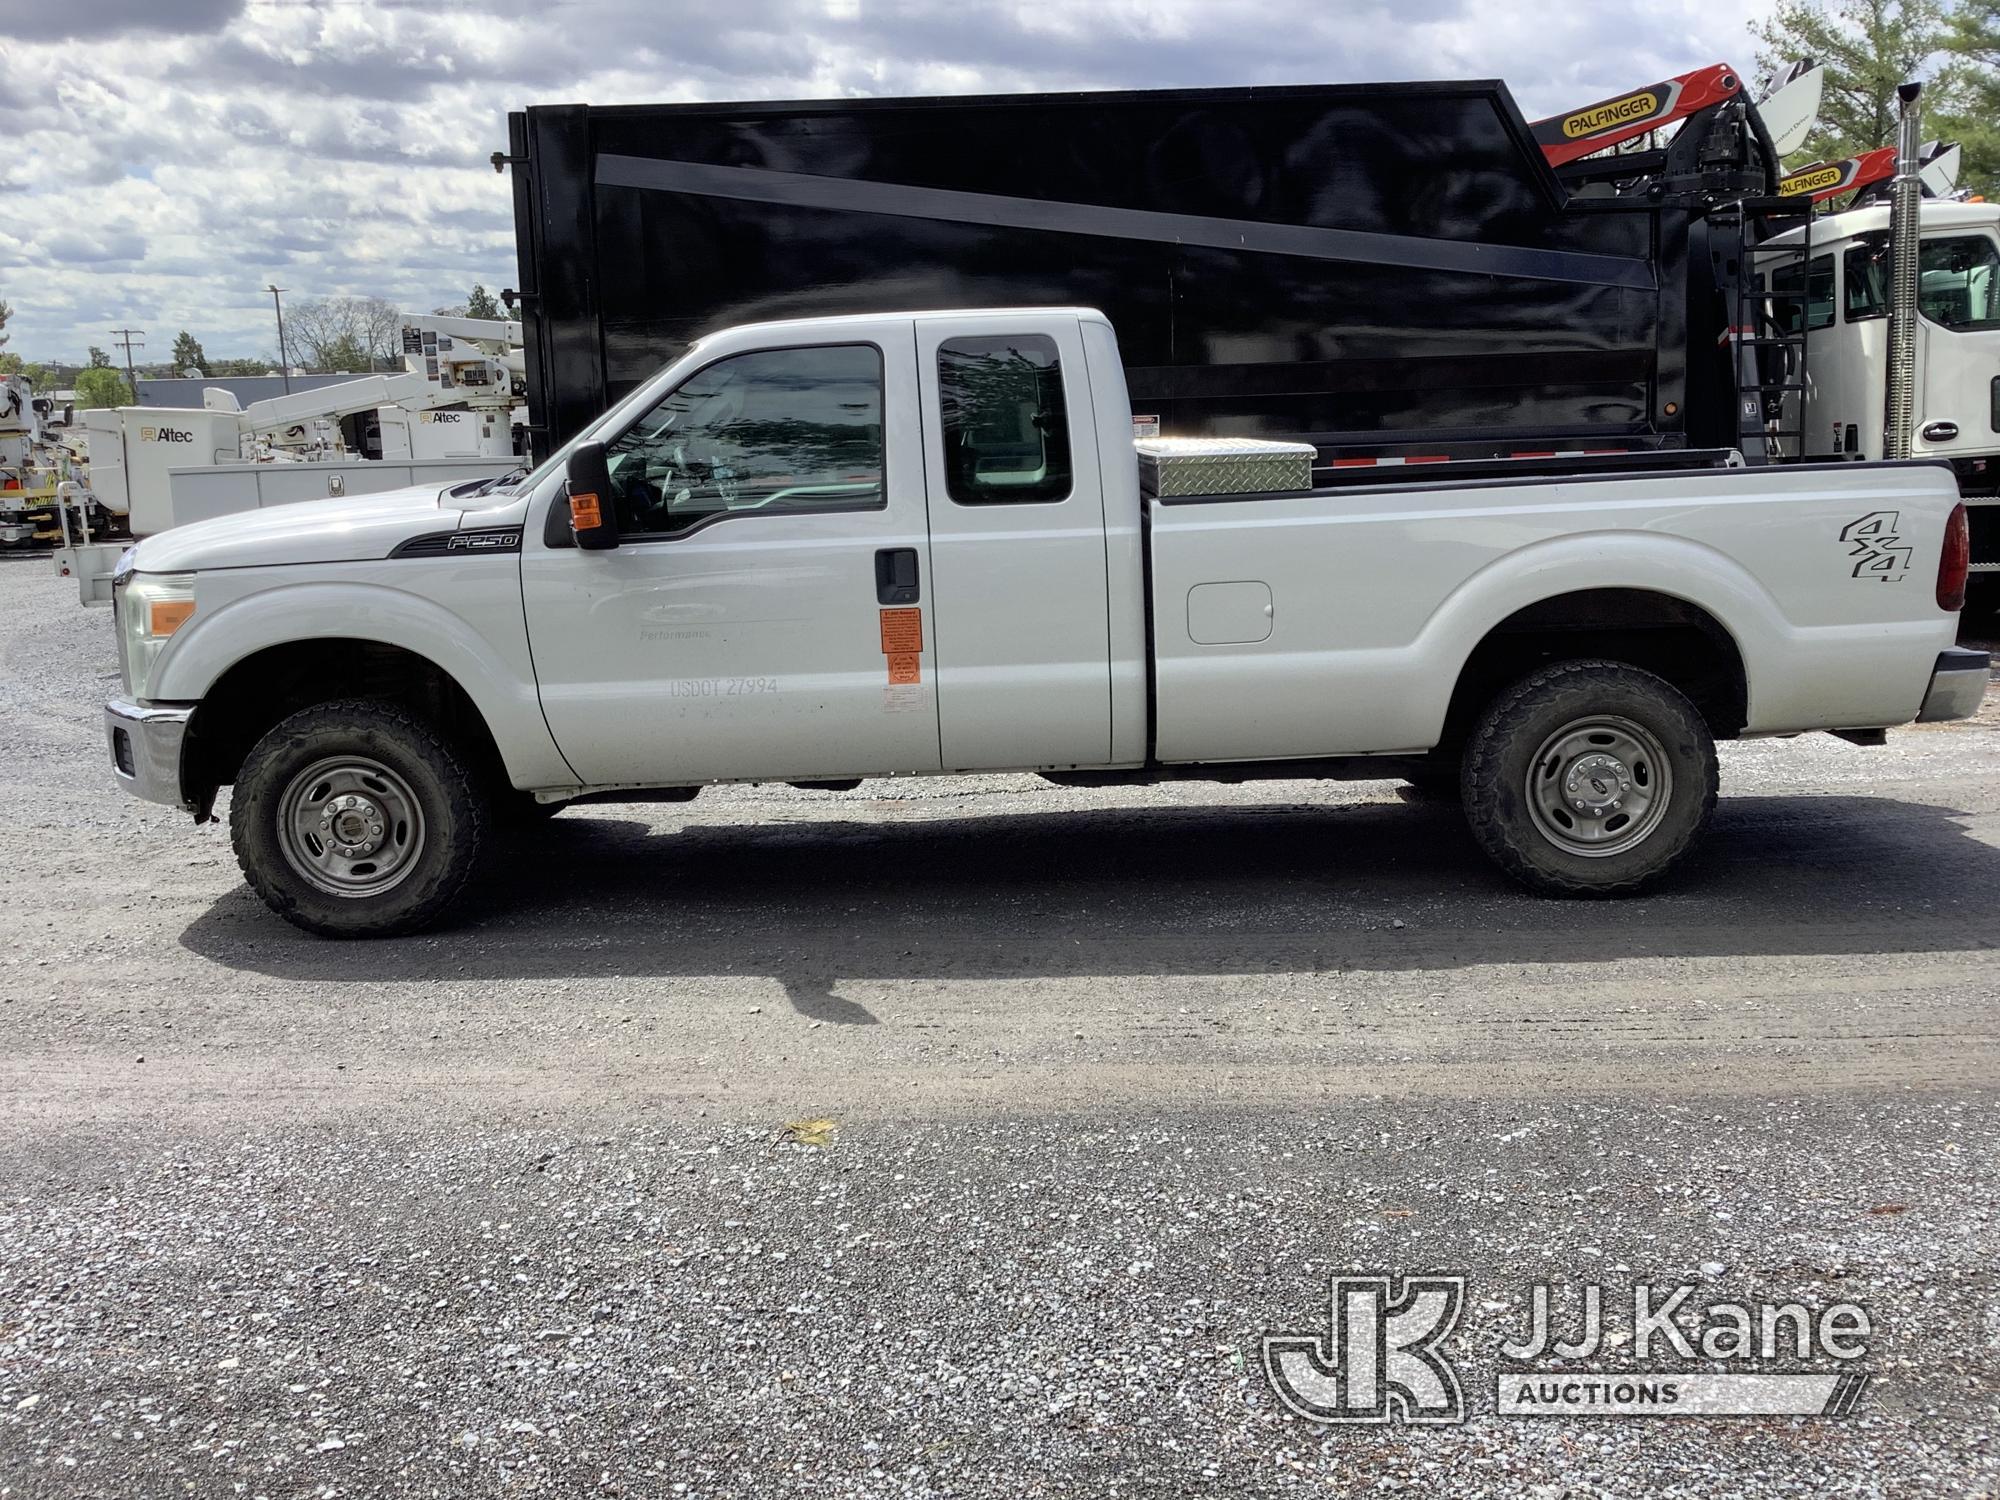 (Frederick, MD) 2016 Ford F250 4x4 Extended-Cab Pickup Truck Runs & Moves, Missing Tailgate, Rust &